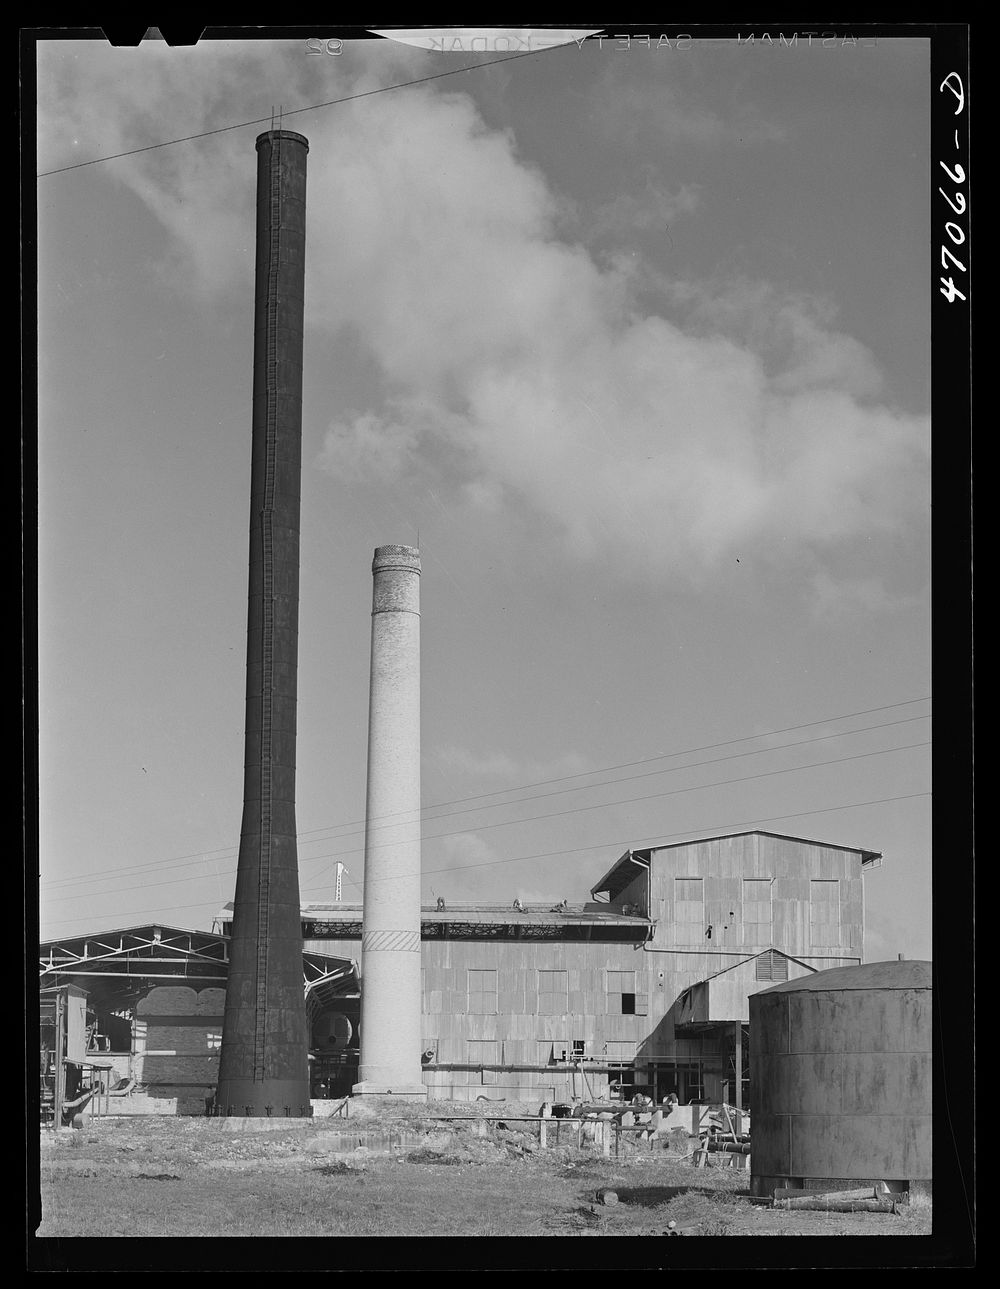 [Untitled photo, possibly related to: Bethlehem, Saint Croix Island, Virgin Islands. The Bethlehem sugar mill]. Sourced from…